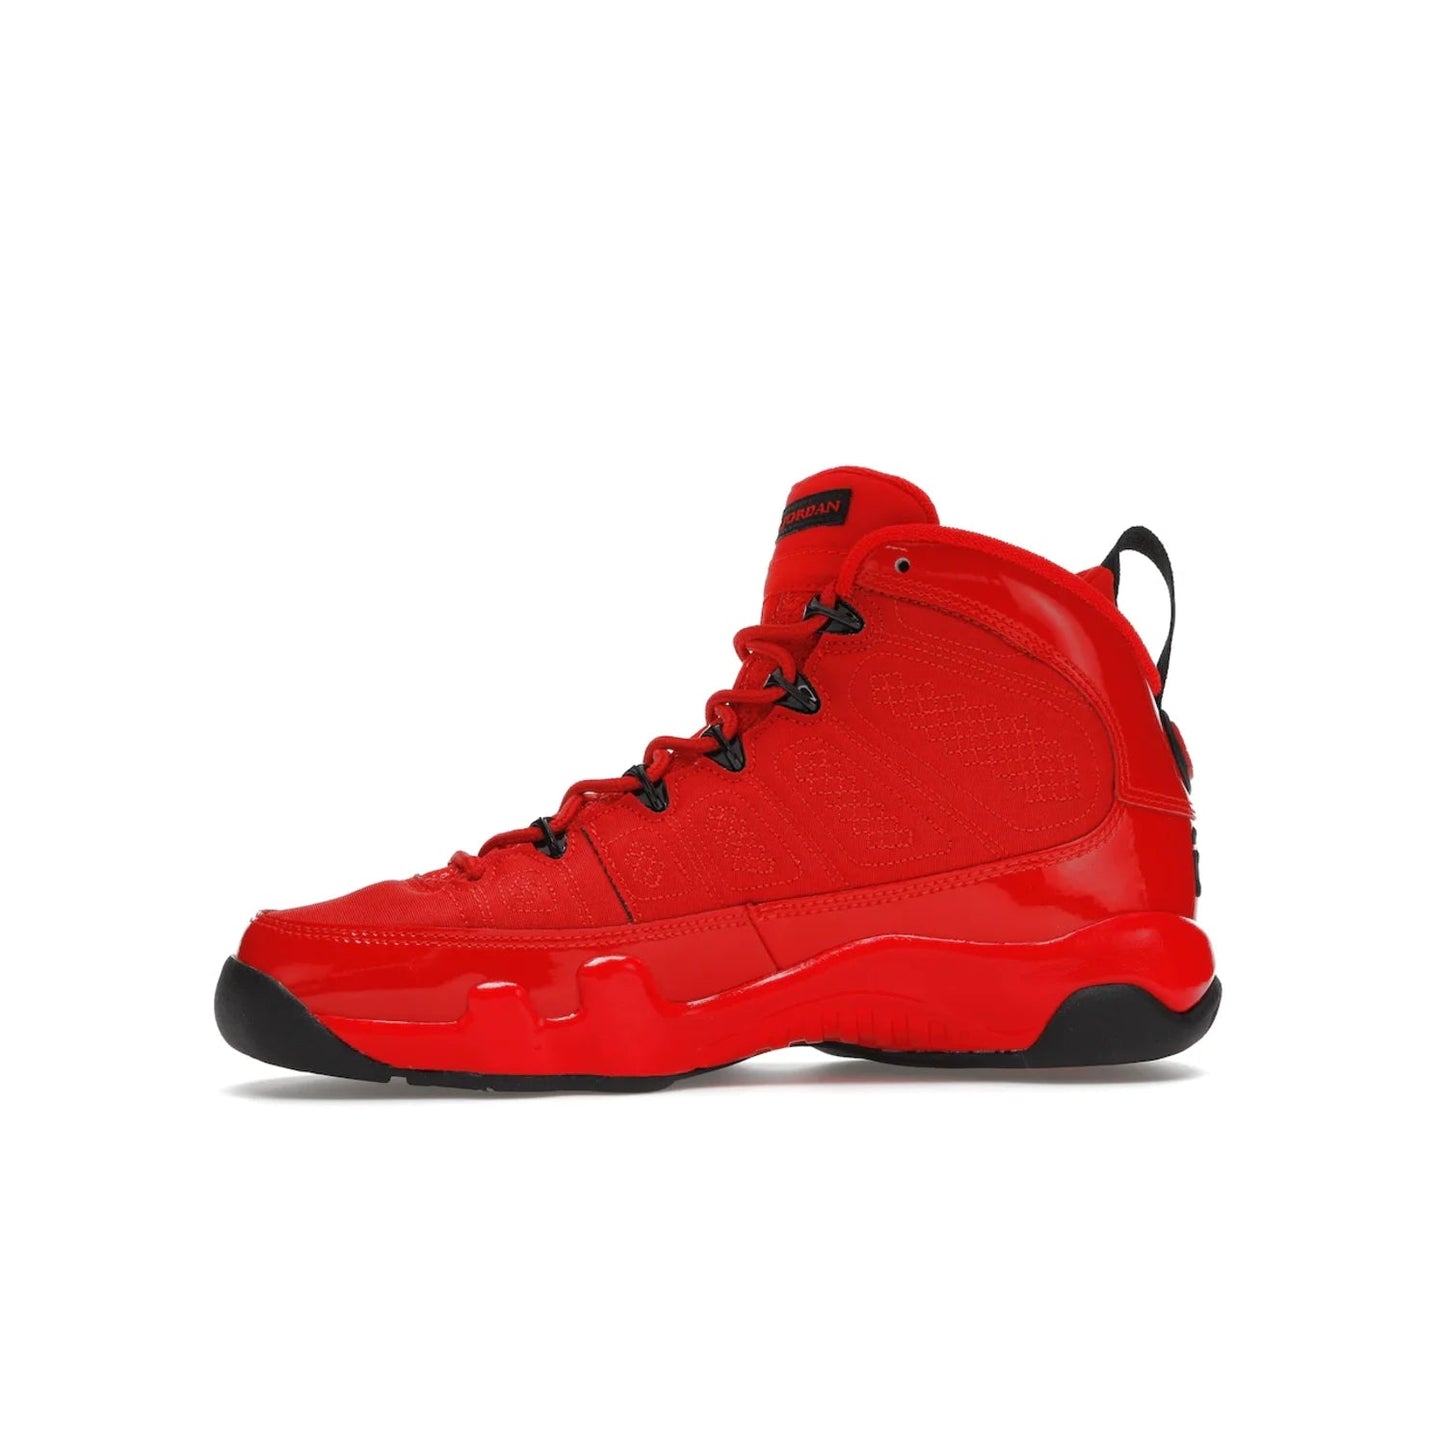 Jordan 9 Retro Chile Red (GS) - Image 18 - Only at www.BallersClubKickz.com - Introducing the Air Jordan 9 Retro Chile Red (GS), a vintage 1993 silhouette with fiery colorway. Features quilted side paneling, glossy patent leather, pull tabs, black contrast accents, and foam midsole. Launching May 2022 for $140.